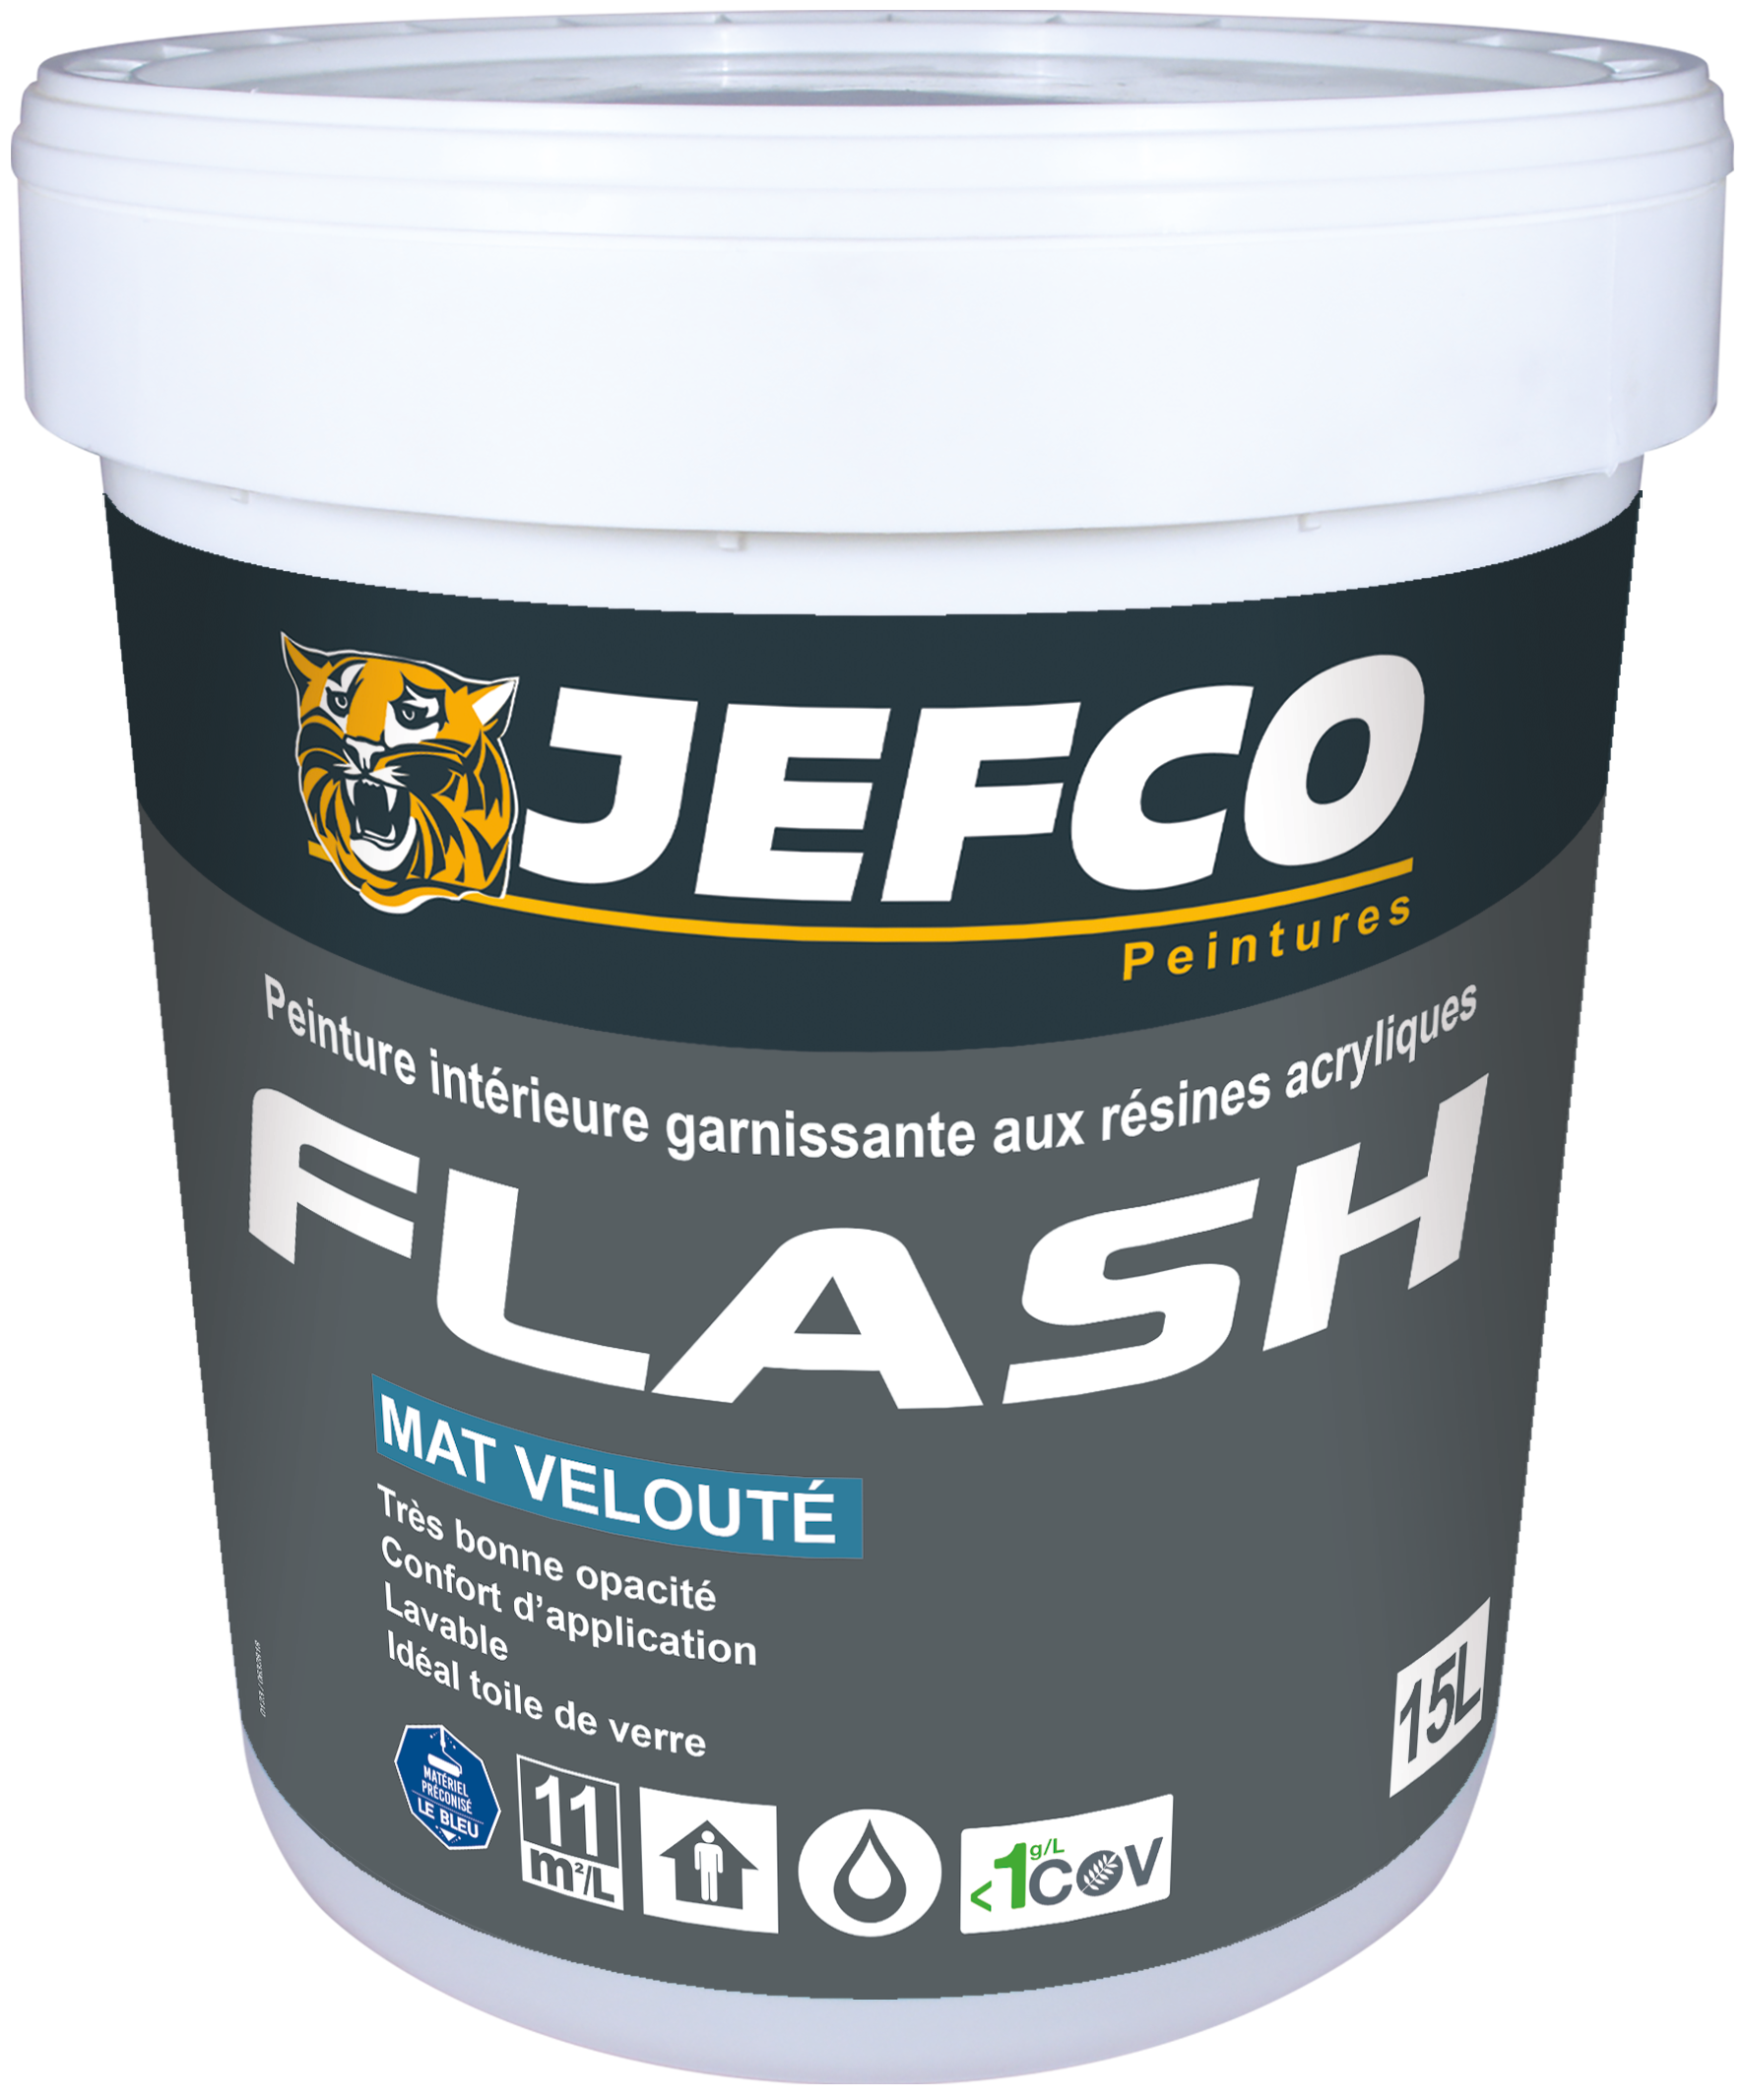 FLASH MAT VELOUTE